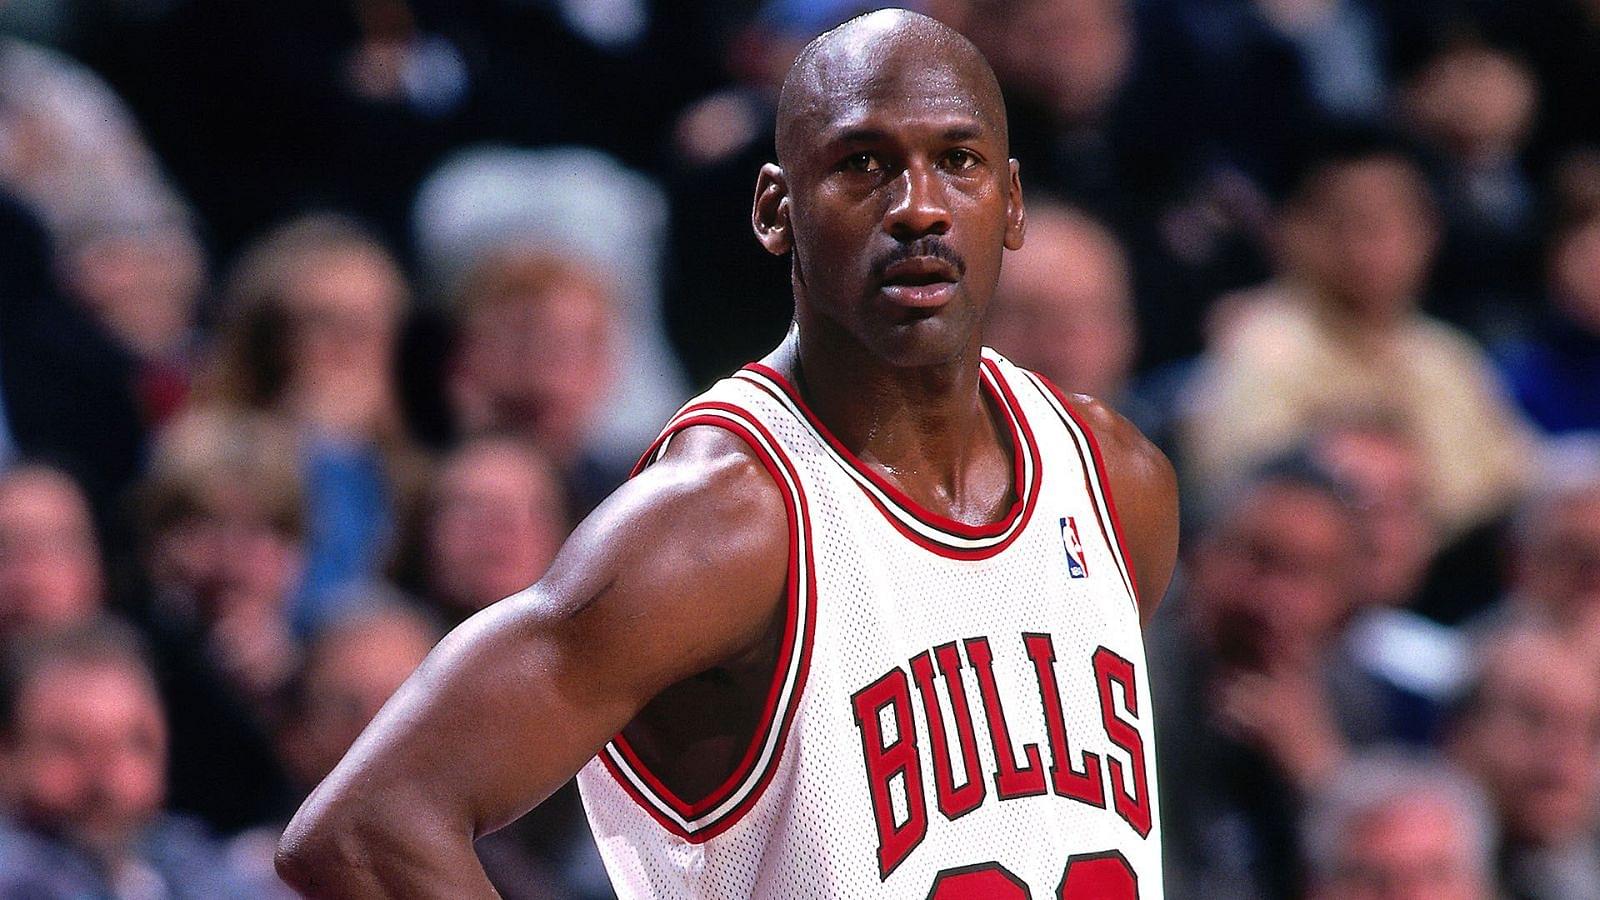 Michael Jordan's Chicago Bulls never lost 3 games in a row from 1990 to 1998, proving His Airness was more dominant than Shaquille O'Neal and Wilt Chamberlain